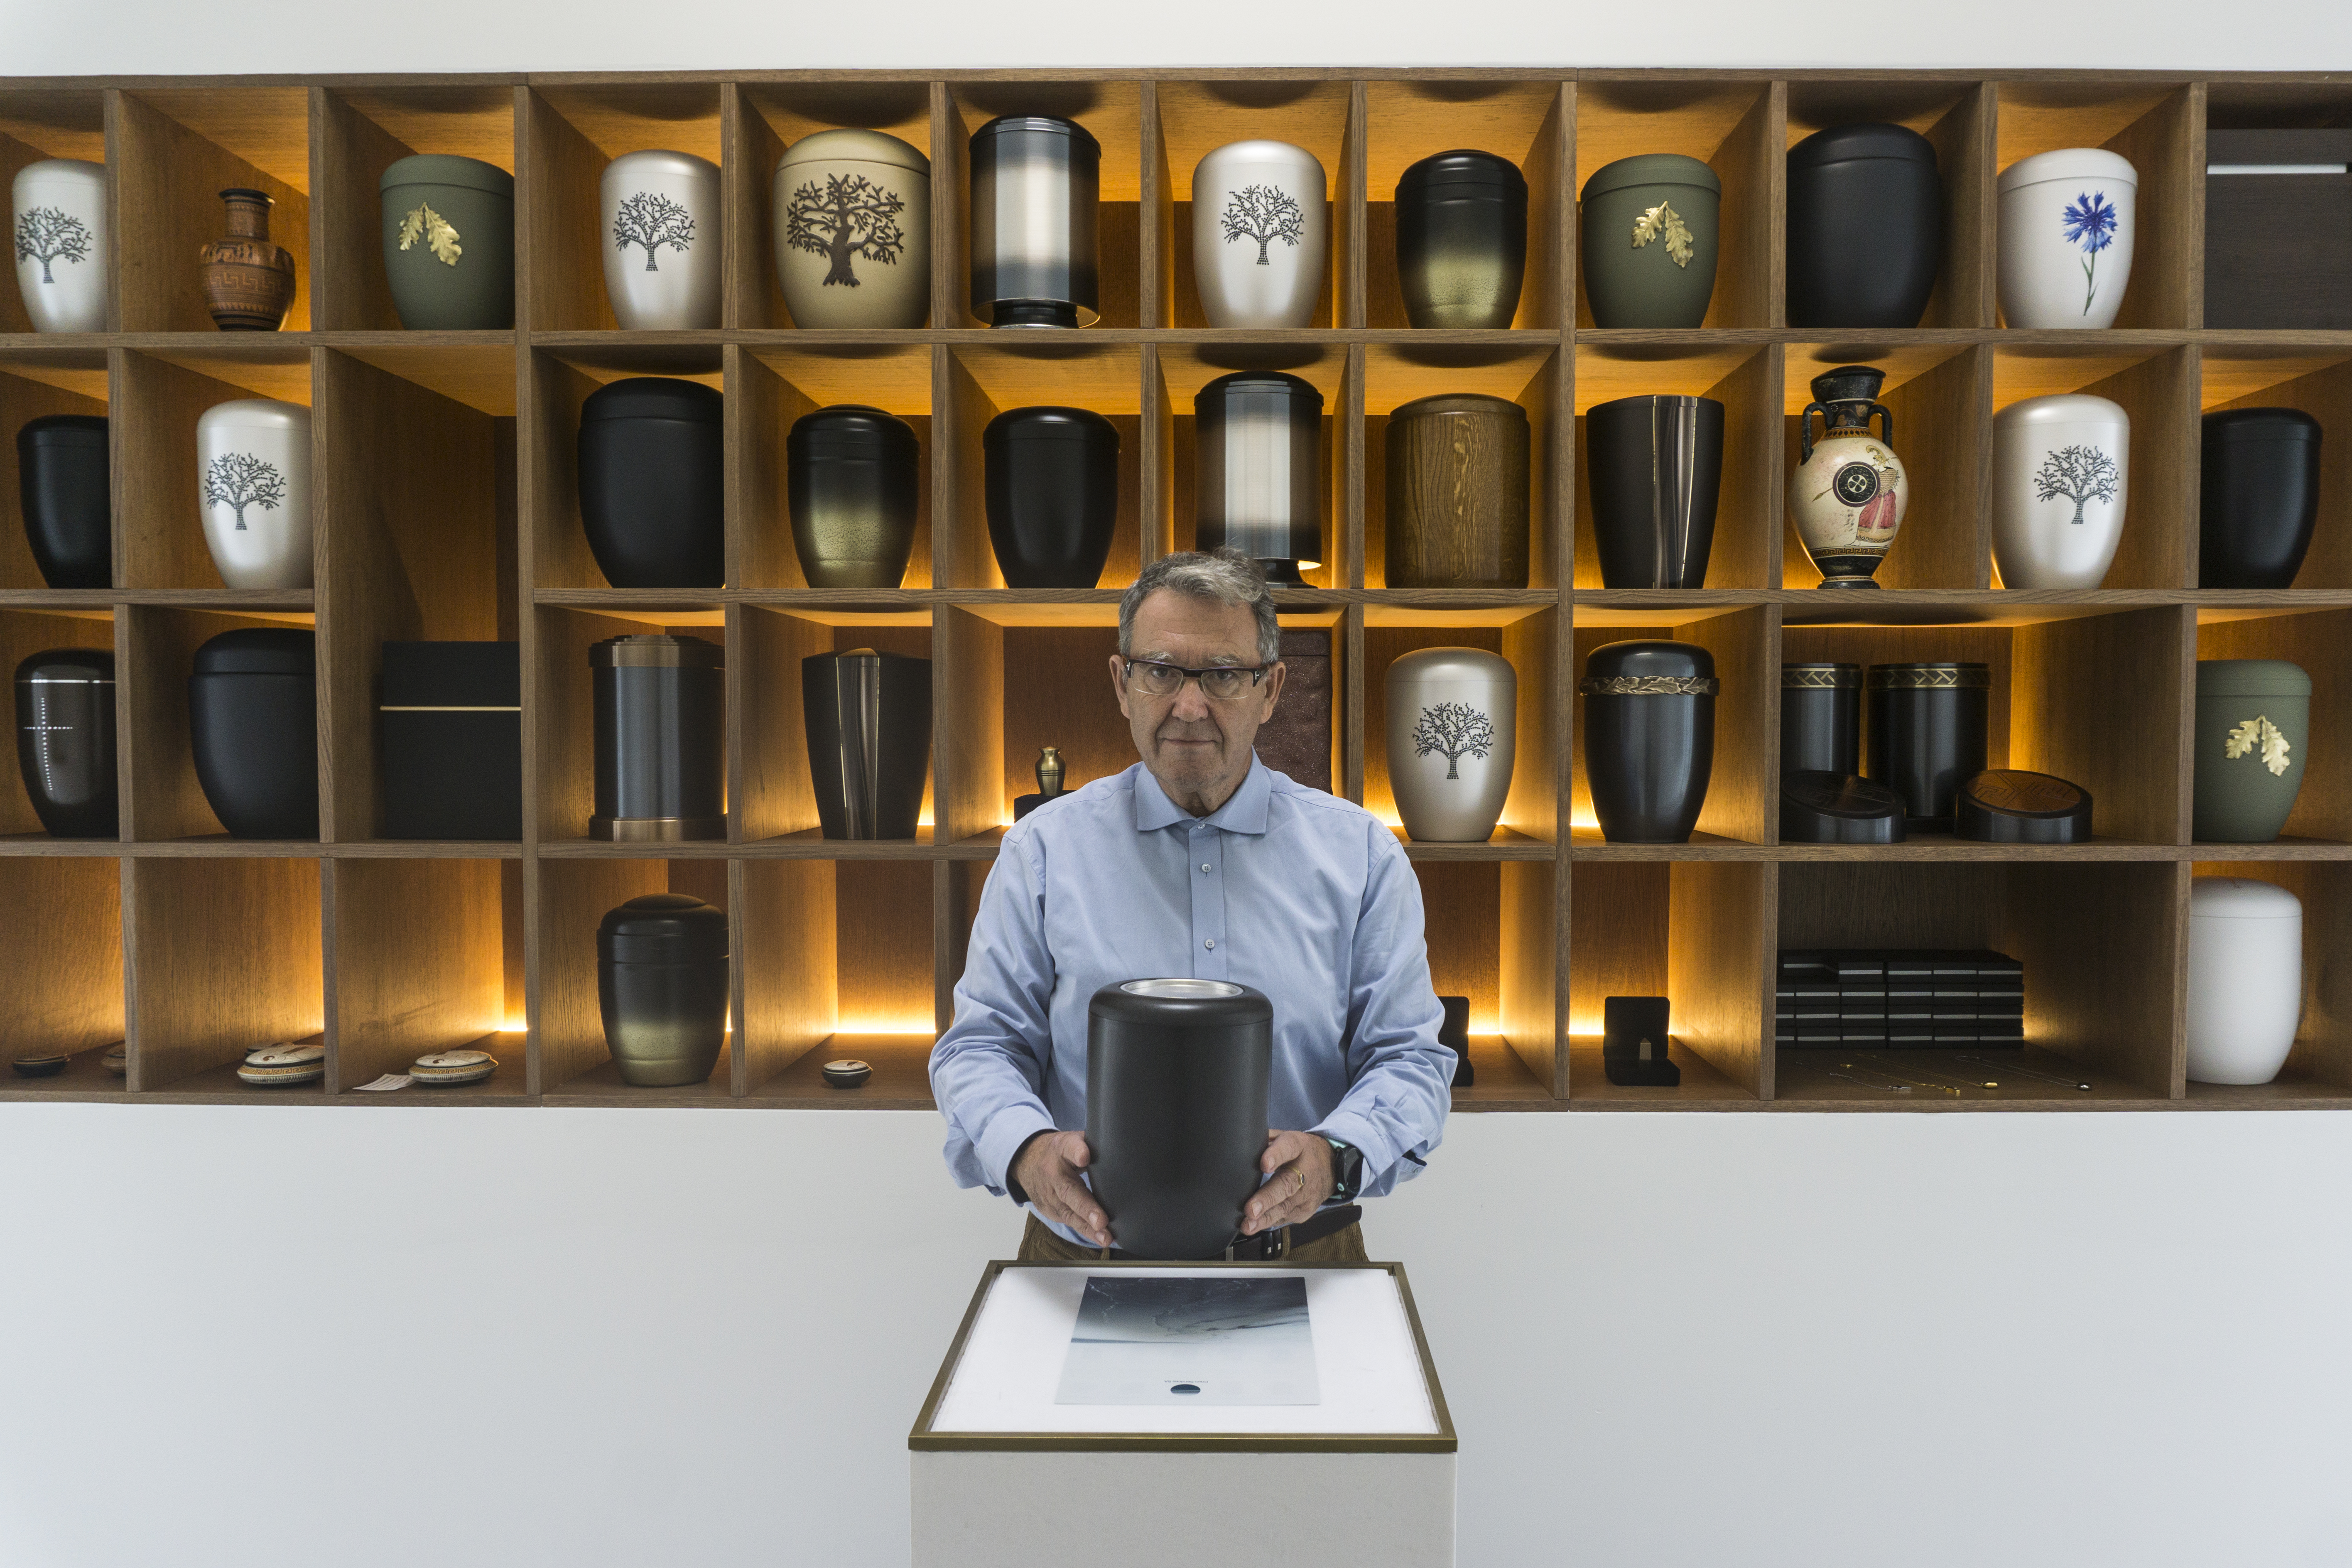 A man stands at a counter holding an urn with many urn designs behind him